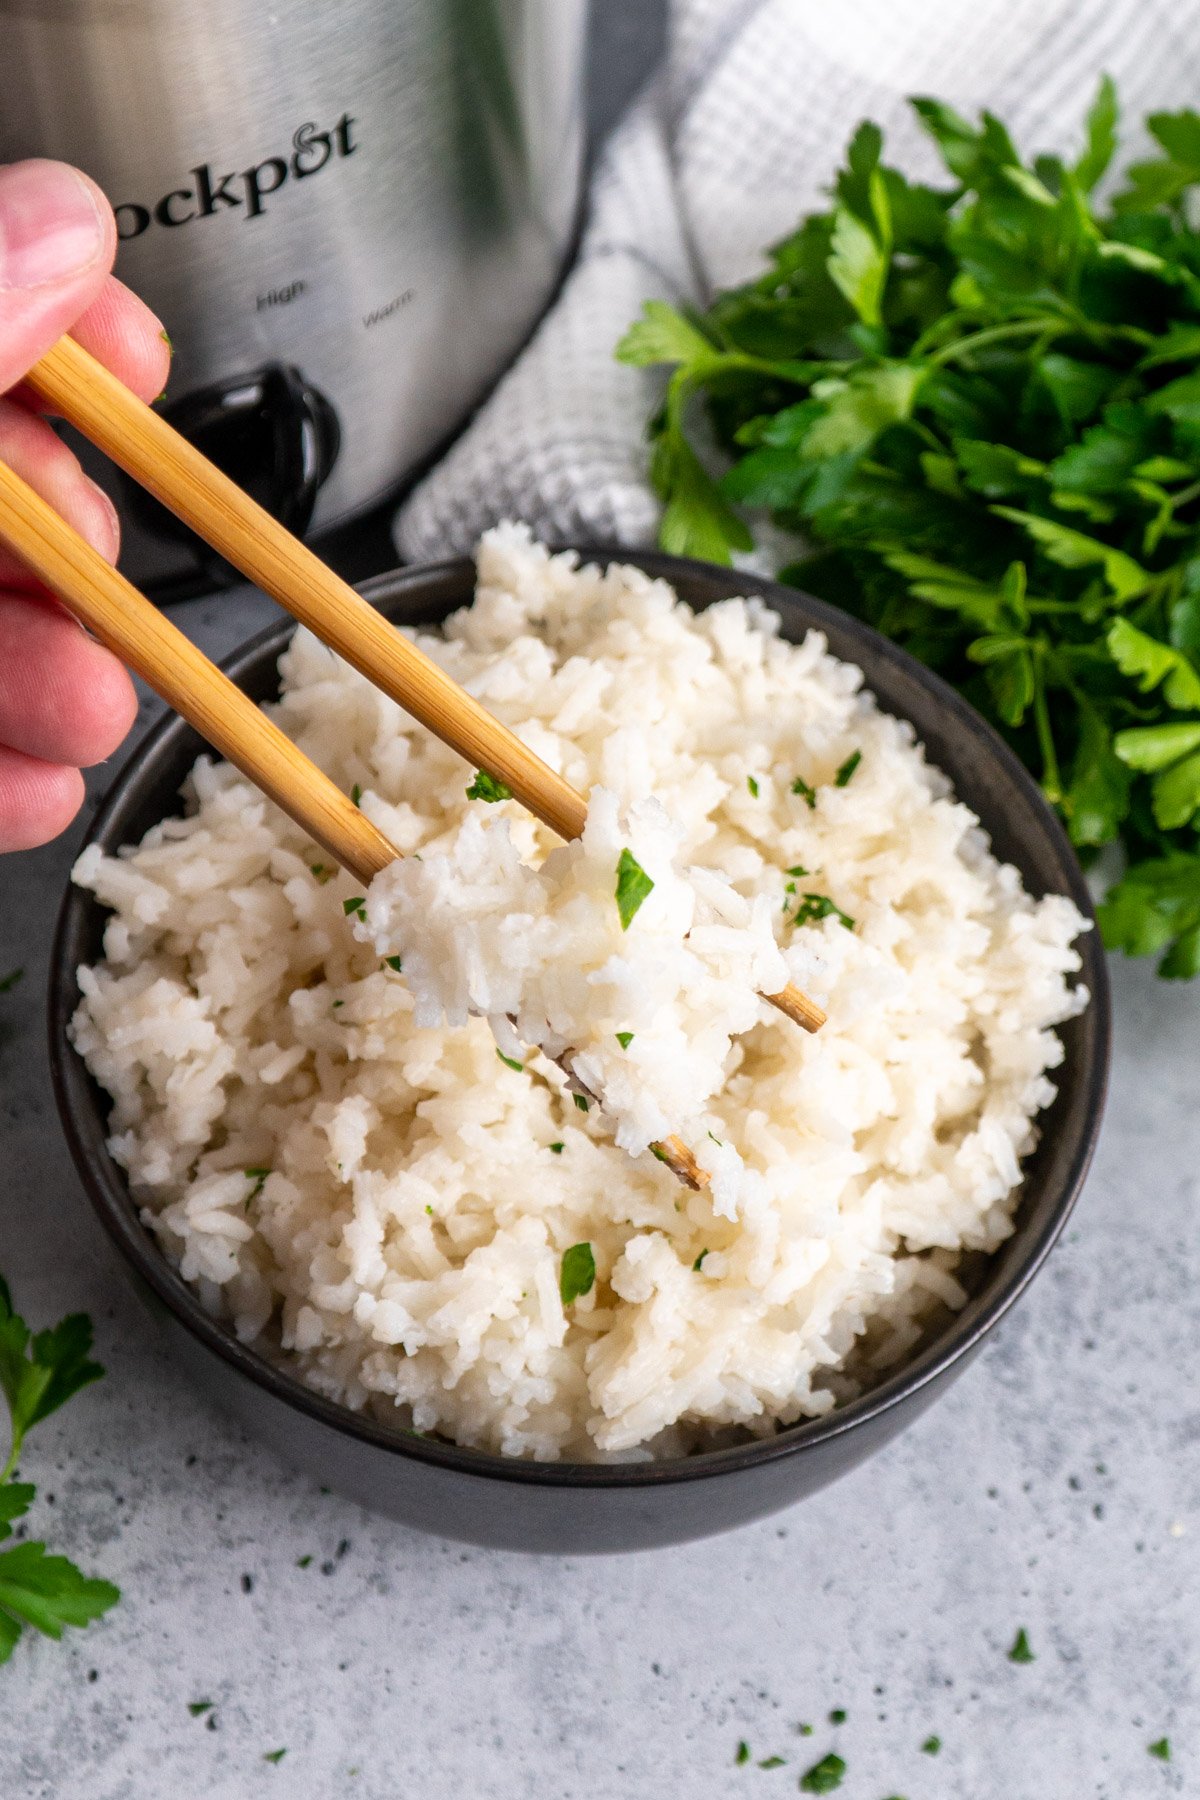 Chopsticks holding cooked rice over a bowl.